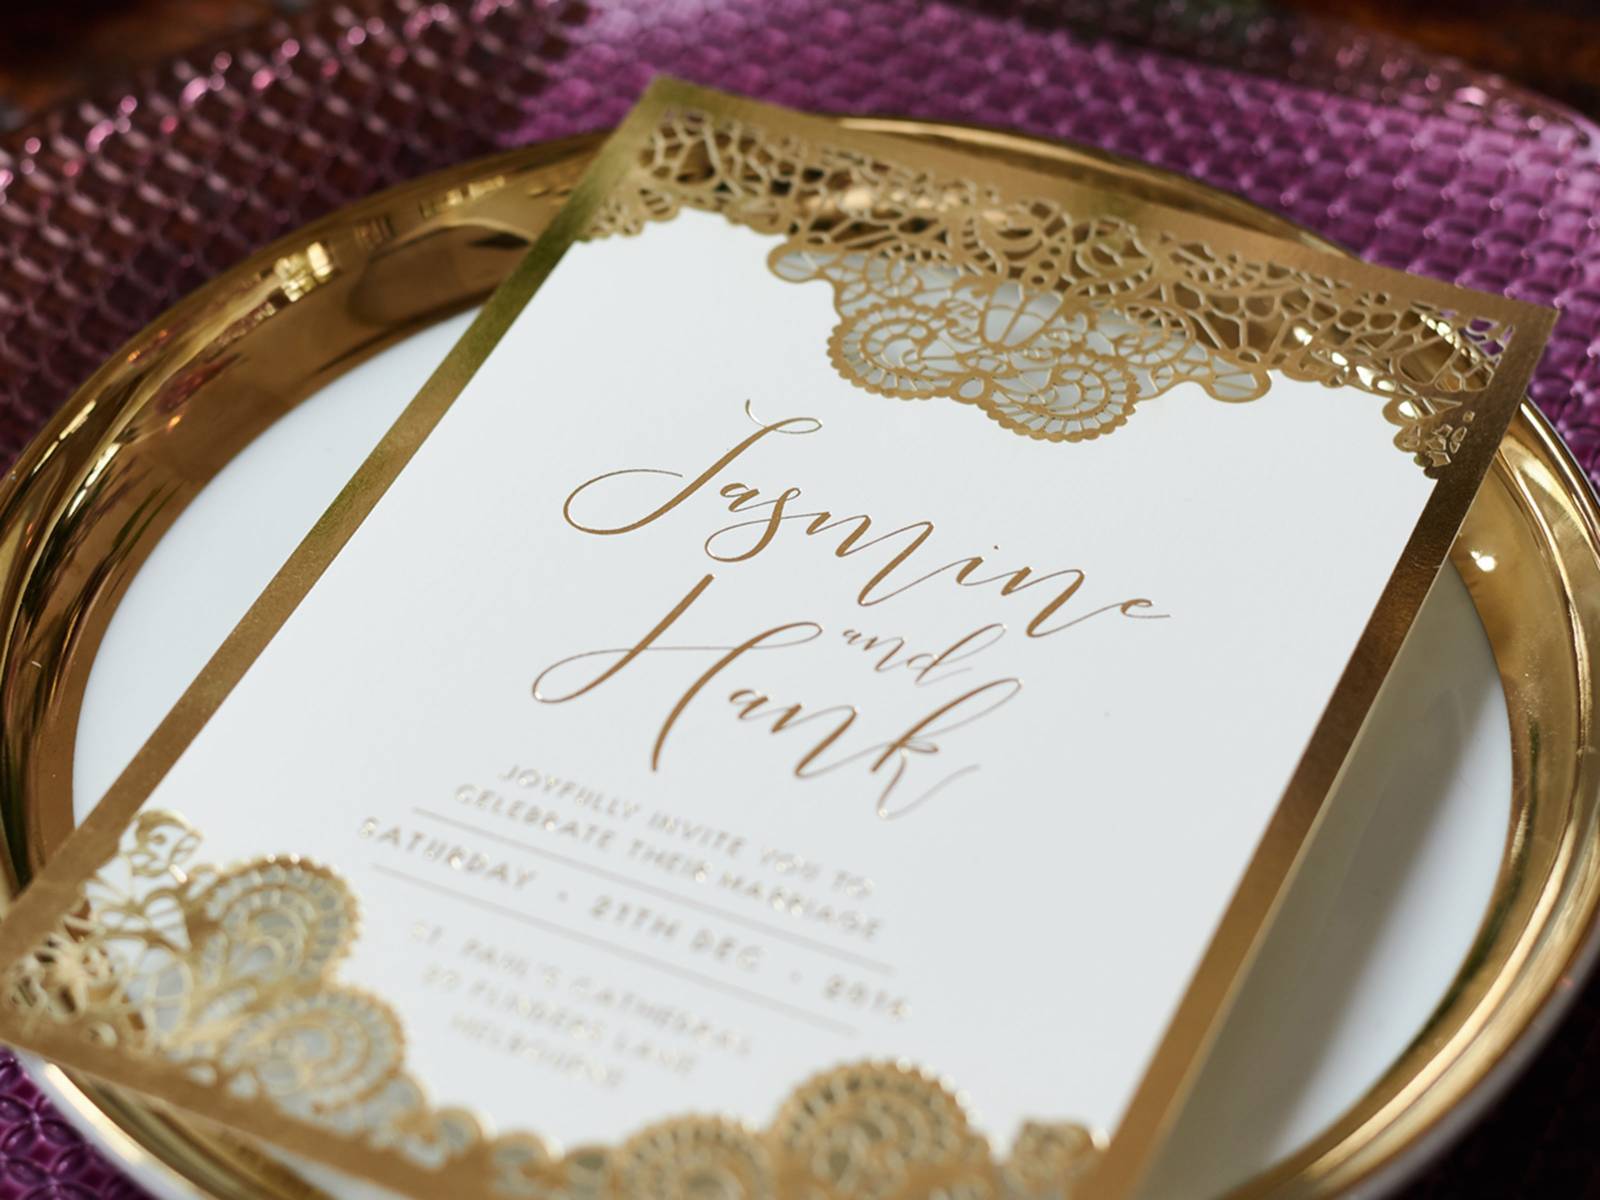 Ornate gold and white wedding invitation on gold rimmed plate and violet charger